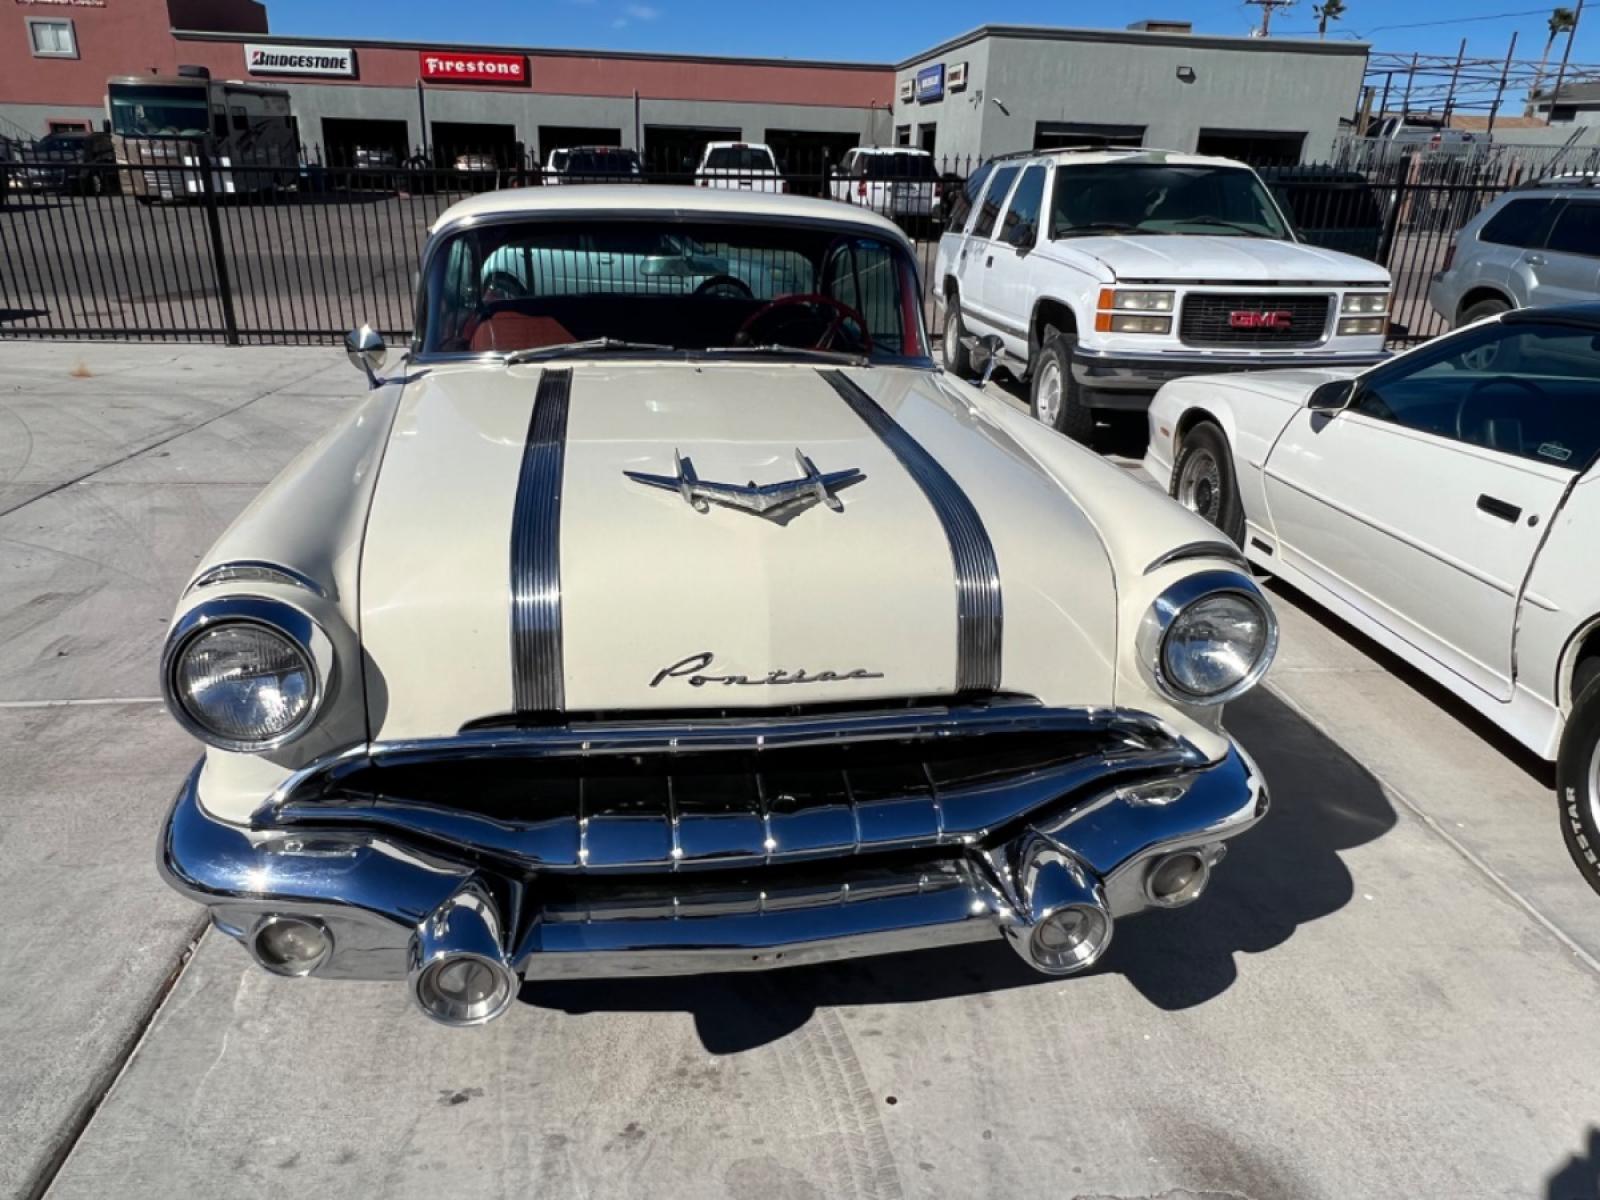 1956 Red pontiac Star chief , located at 2190 Hwy 95, Bullhead City, AZ, 86442, (928) 704-0060, 0.000000, 0.000000 - 1956 Pontiac Starchief Original 52,539 Original Miles. Original Interior. Stored over 30+ years in air conditioned storage . We are adding vintage air conditioning. This car is very rare with the original paint and original interior. Actual miles of 52,539. 326 cubic in V8. - Photo #1